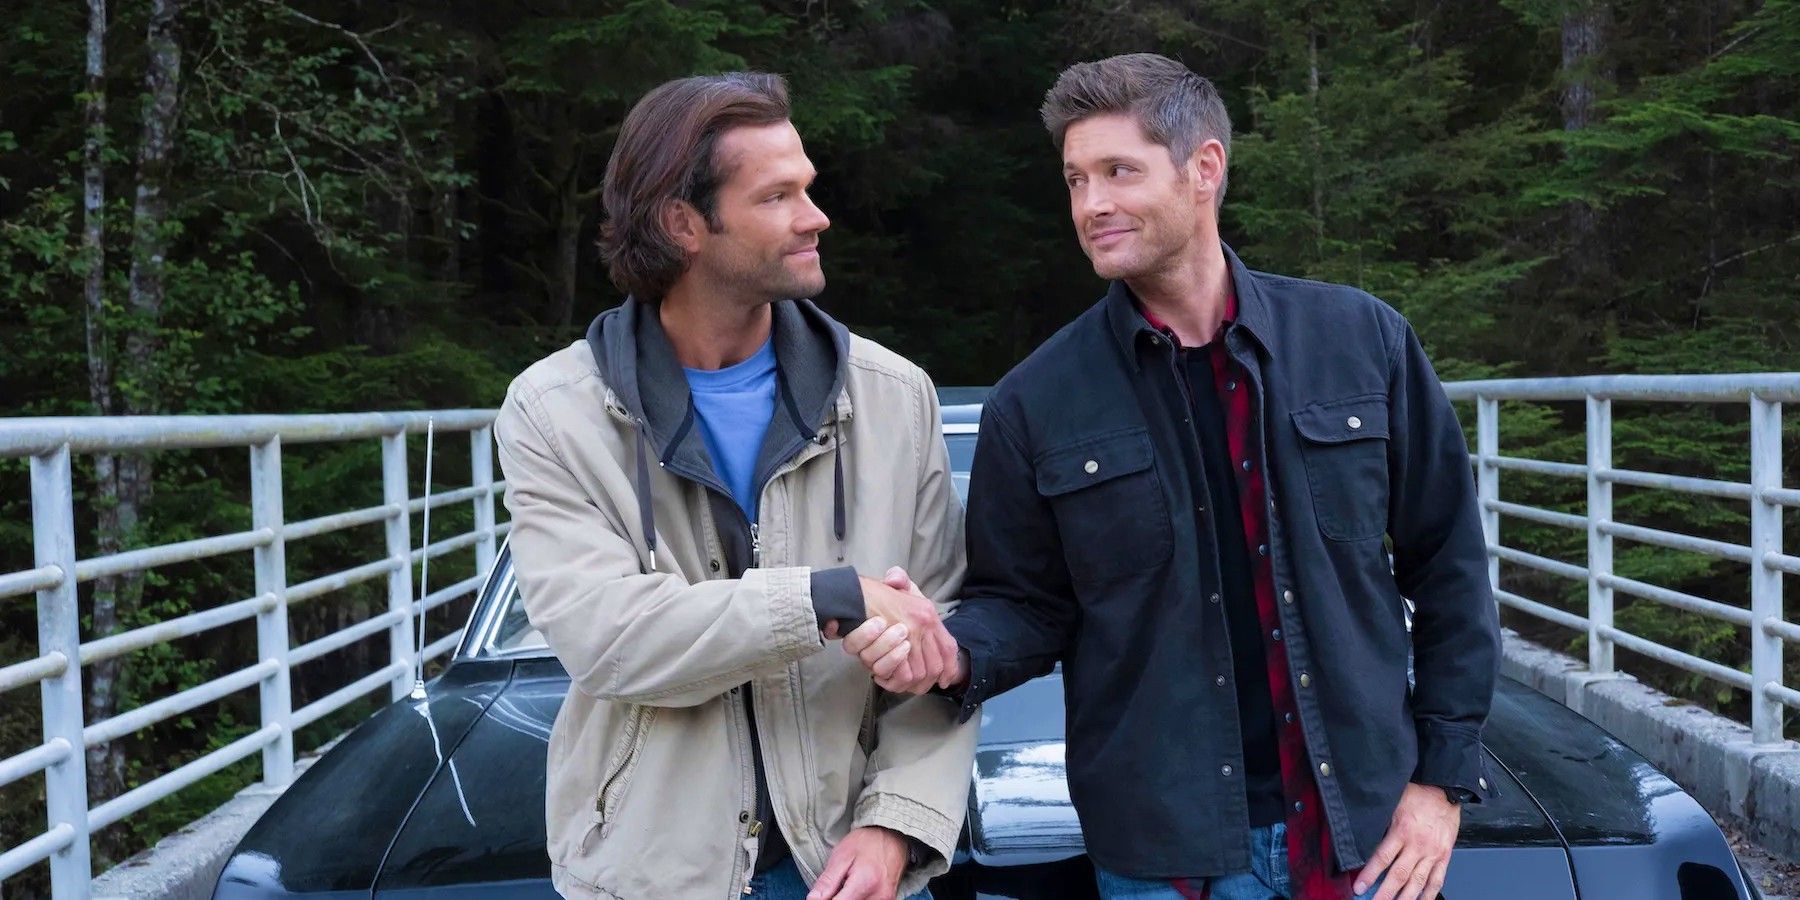 Here's how everyone's story ended on Supernatural